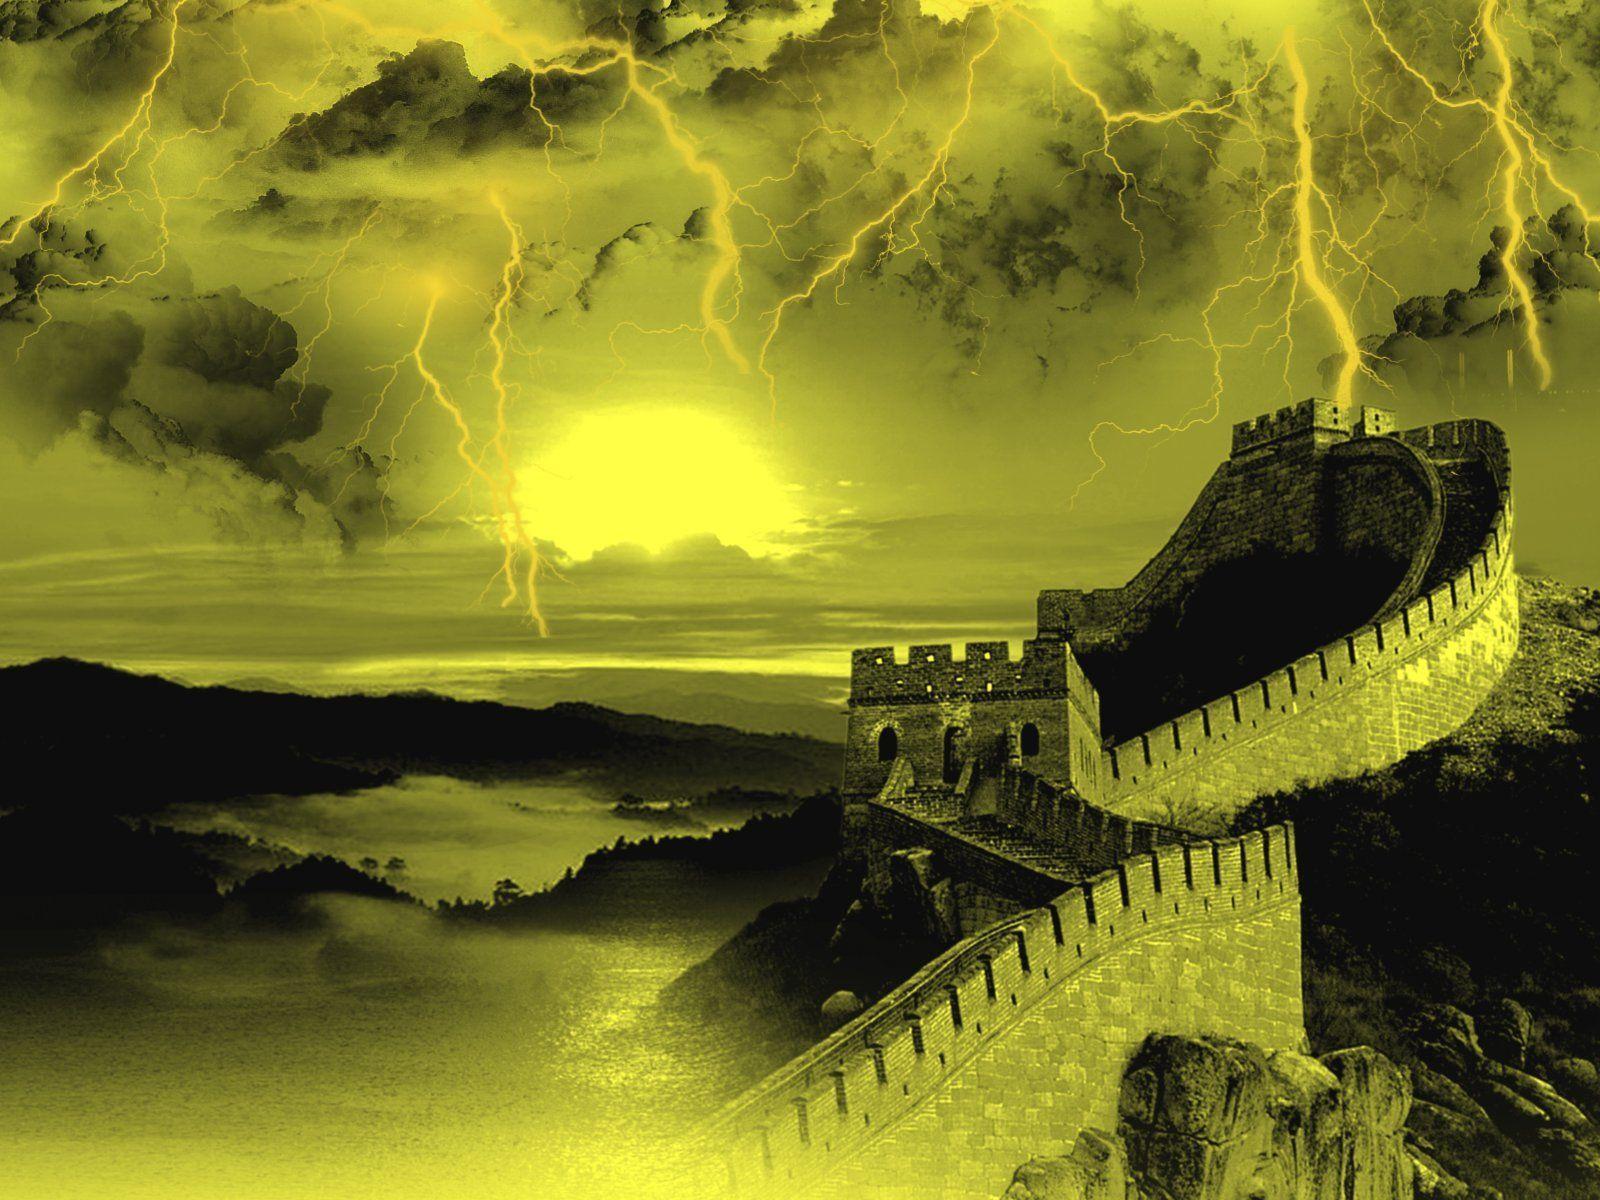 Great Wall Of China Computer Wallpaper, Desktop Background